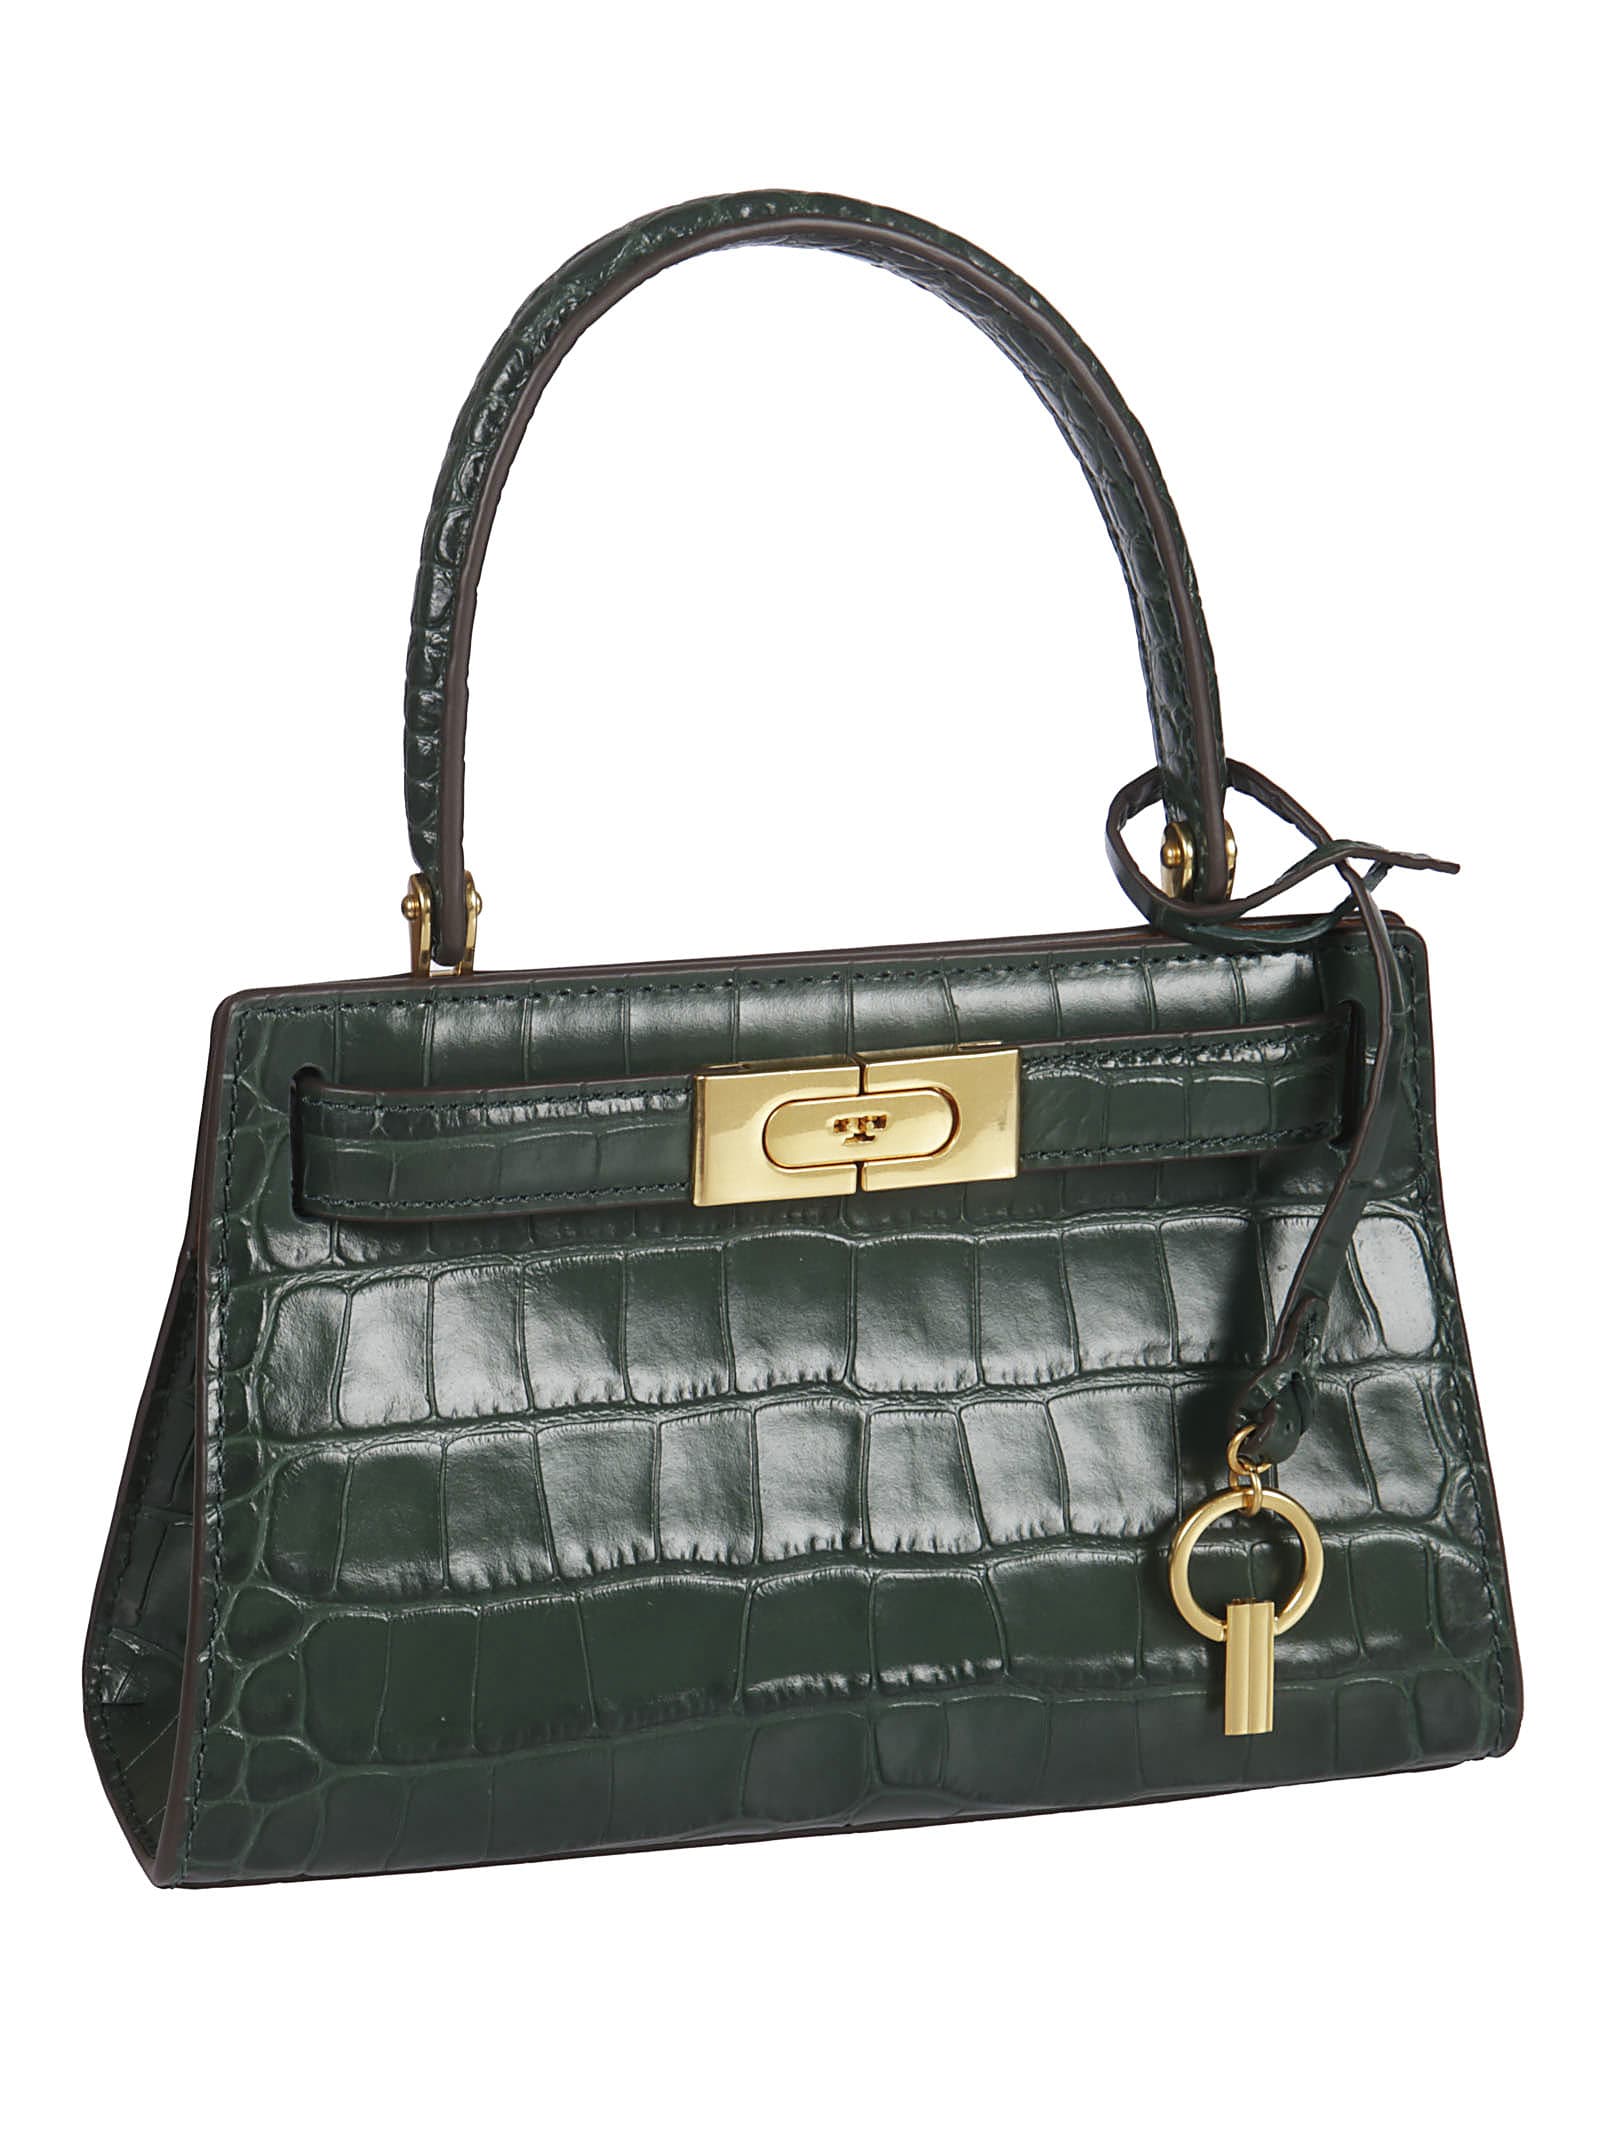 Tory Burch - @linhniller carrying the Juliette in Boxwood More on